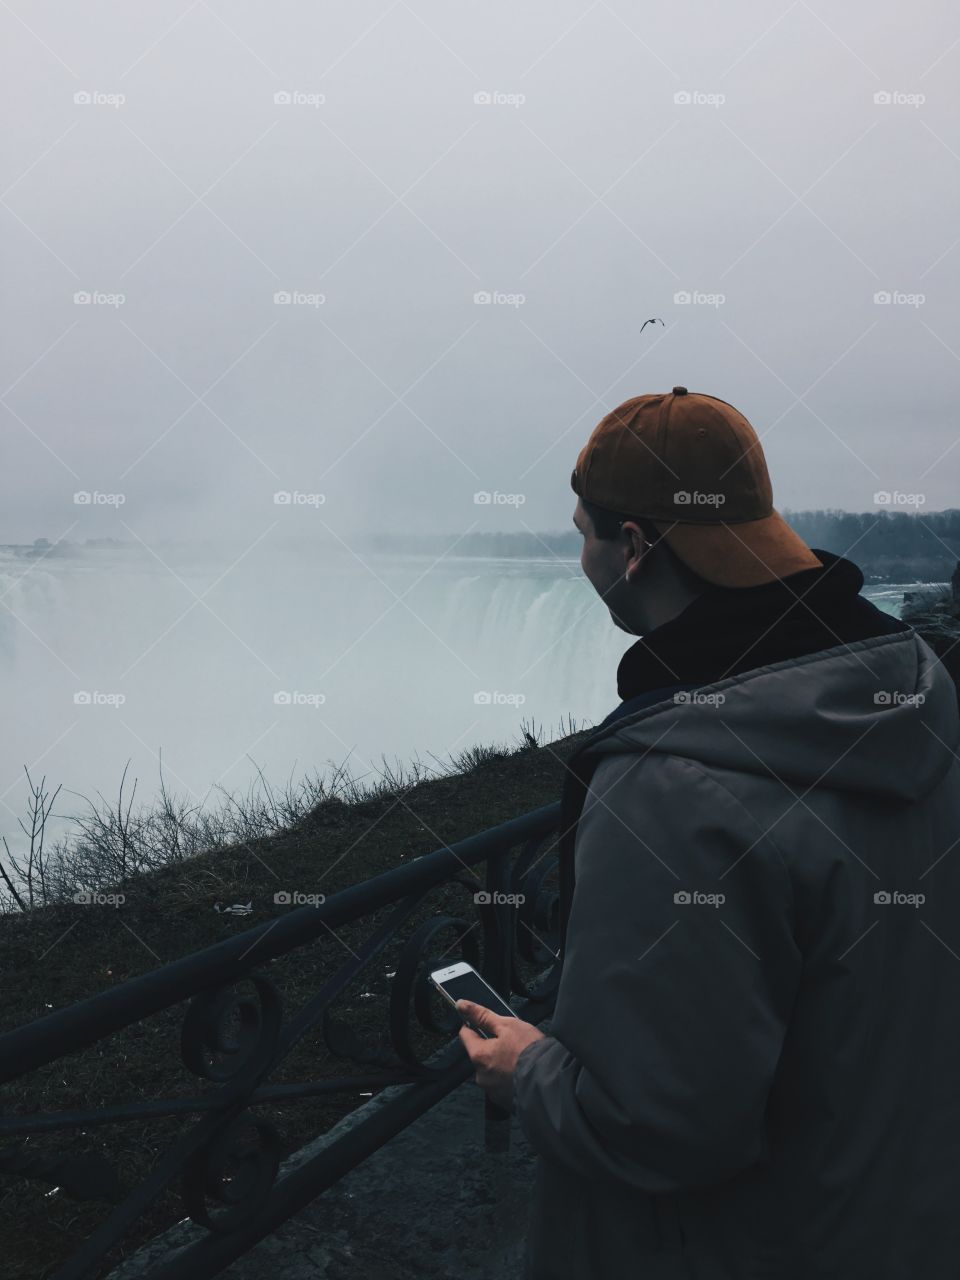 Taking some pictures out on Ontario’s Niagara Falls! 